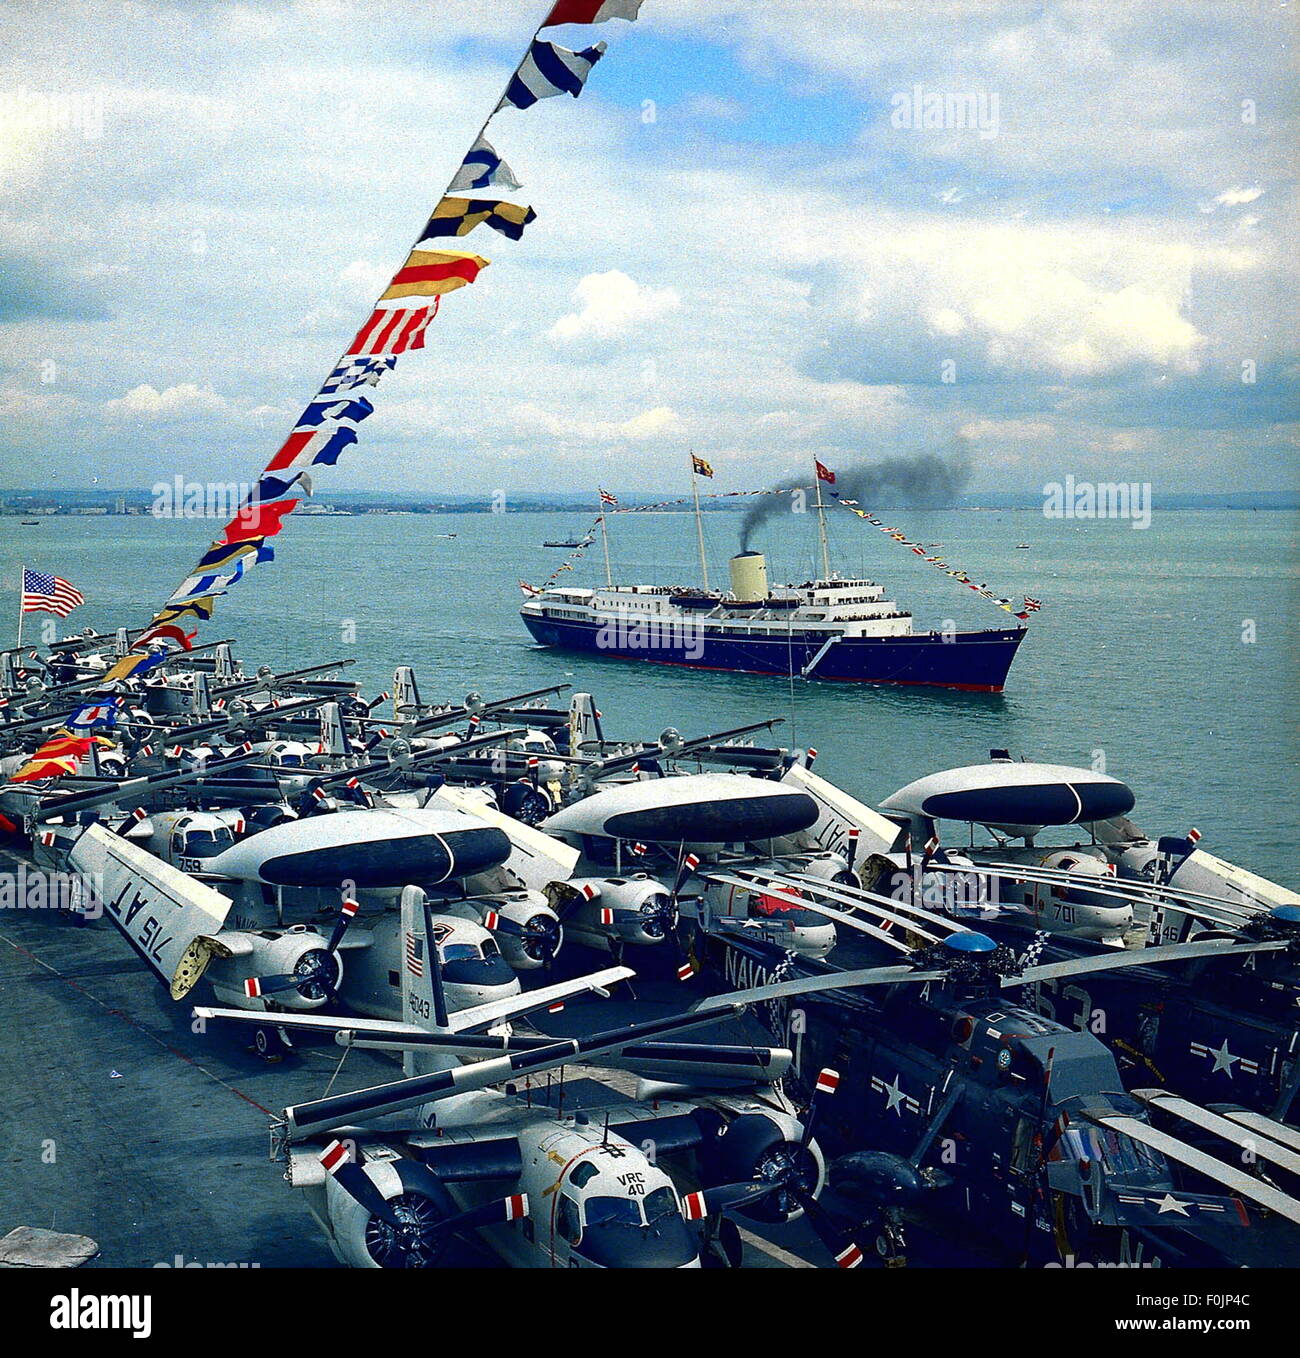 AJAXNETPHOTO - (PMO) 16 MAY 1969. - ROYAL INSPECTION - THE ROYAL YACHT BRITANNIA CARRYING QUEEN ELIZABETH II, THE DUKE OF EDINBURGH AND PRINCESS ANNE, PICTURED OFF SPITHEAD FROM THE DECK OF THE USS WASP, DURING THE ROYAL REVIEW OF 61 WARSHIPS OF TWELVE N.A.T.O. (NORTH ATLANTIC TREATY ORGANISATION) COUNTRIES.  PHOTO:JONATHAN EASTLAND/AJAX REF:C6919 10 Stock Photo